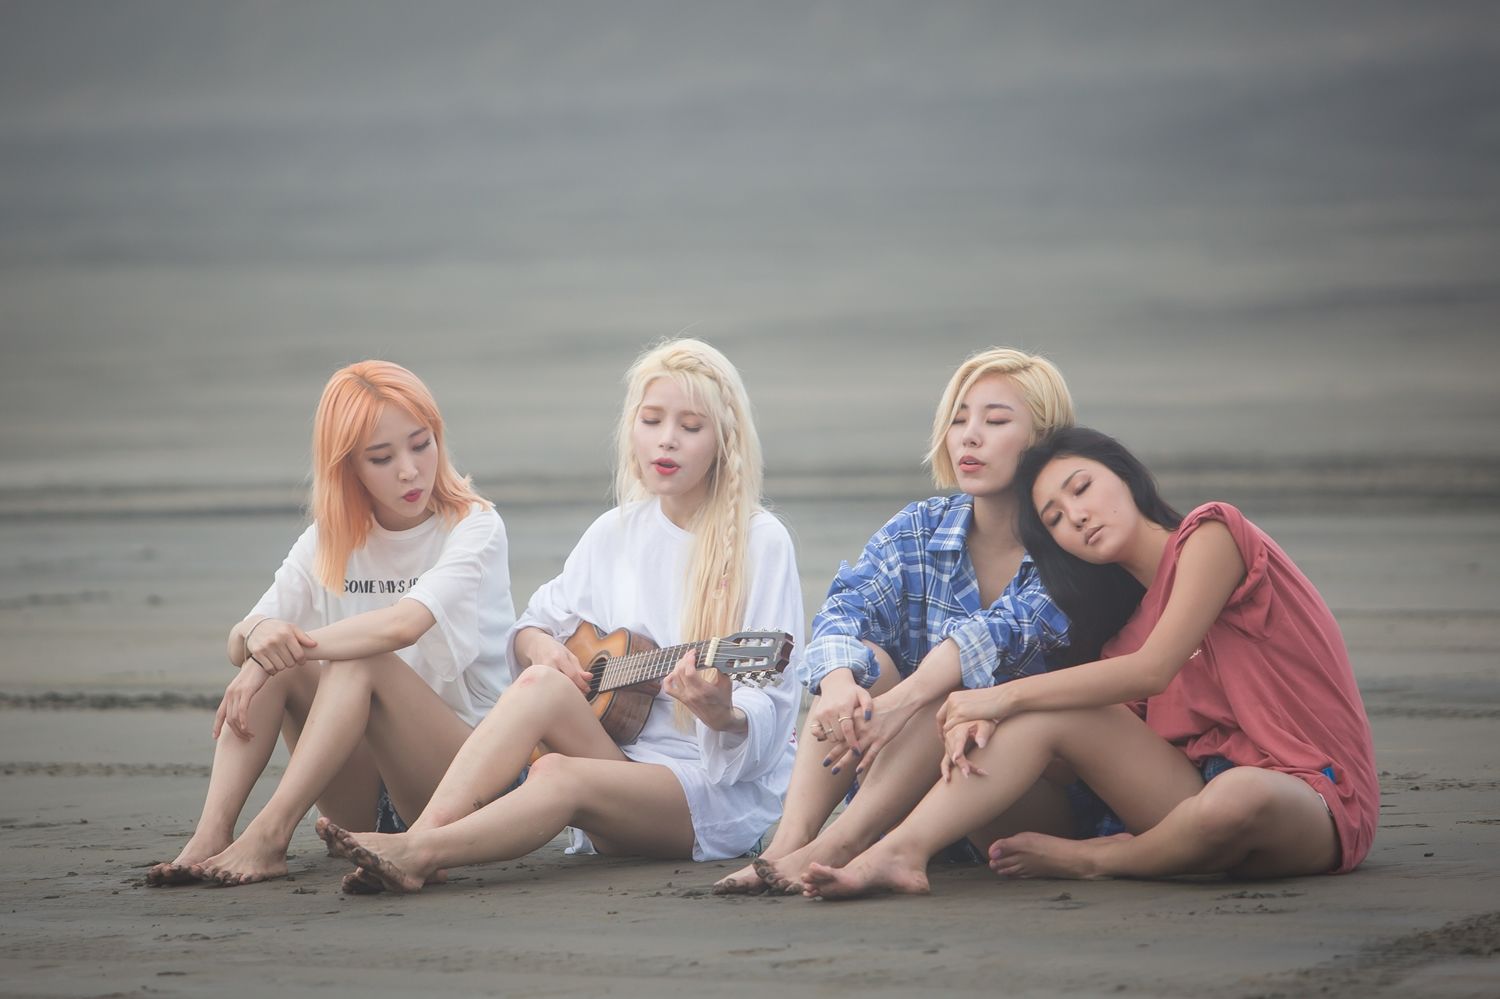 Asia One Top Girl Group TWICE will release its new album India Summer Nightstand (Summer Nights) on the 9th and return with its title song Dance the Nightstand Lee Jin-hyuk (Dance The Night Away).Dance the Nightstand Lee Jin-hyuk is a cool 5 Seconds of Summer song that will make the midsummer heat of the song written by senior Singer Wheesung.The teaser, which was released earlier, featured TWICE, which turned into a lovely beach girl.What Orange Is the New Black Love, which recorded music charts, music ranking programs, 12 gold medals, and 8 consecutive music videos exceeding 100 million views.And then there is interest in what record to write.The album India Summer Nightstand includes three new songs, including the title song Dance the Nightstand Lee Jin-hyuk, CHILLAX and Shot through the heart and the mini-five album What Orange Is the New Black Love?It contains a total of 9 tracks including the songs recorded.Shot Through the Heart was written by TWICE members Momo, Sana and Mina, and this is the first time that three members are responsible for the song of TWICE.MAMAMOO, which is working on a color project this year, will make a comeback on the 16th with its seventh mini album, RED Moon.It is popular with Starry Night, which is a yellow color of Hwasa, and it stimulates curiosity about what kind of atmosphere will come out with Moonbyuls RED color.RED Moon is the second color of the Four Seasons Four Color Project and the Moonbyul symbol RED is a combination of Moonbyul, the agency said. We will be able to meet the glamorous and passionate charm of MAMAMOO, which resembles summer.GFriend also announced a quick comeback three months after Night: releasing the Summer Mini album on Wednesday and entering the 5 Seconds of Summer Queen War.I wonder what kind of atmosphere GFriend will hit the summer charts with the summer of 2015 We Are From Today, 2016 You and Me, and 2017 Trying to Ear.The teaser image was filled with a refreshing background, and six ice creams were put together, making the GFriend feel a plump and youthful atmosphere.Red cassette players and skateboards had a retro vibe, and a new team logo reminiscent of the summer sun caught the eye.The old team unit Semina has a three-color charm.The combination of pleasant cleaning, refreshing Mina and mature Na Young has been recognized for his ability in the Mnet Produce 101 Season 1 evaluation stage, and he is receiving the expectation of fans.The title song Samina is a song that can feel the members cool singing ability. Mina has been named as a lyricist. The release date is 6 pm on the 10th.